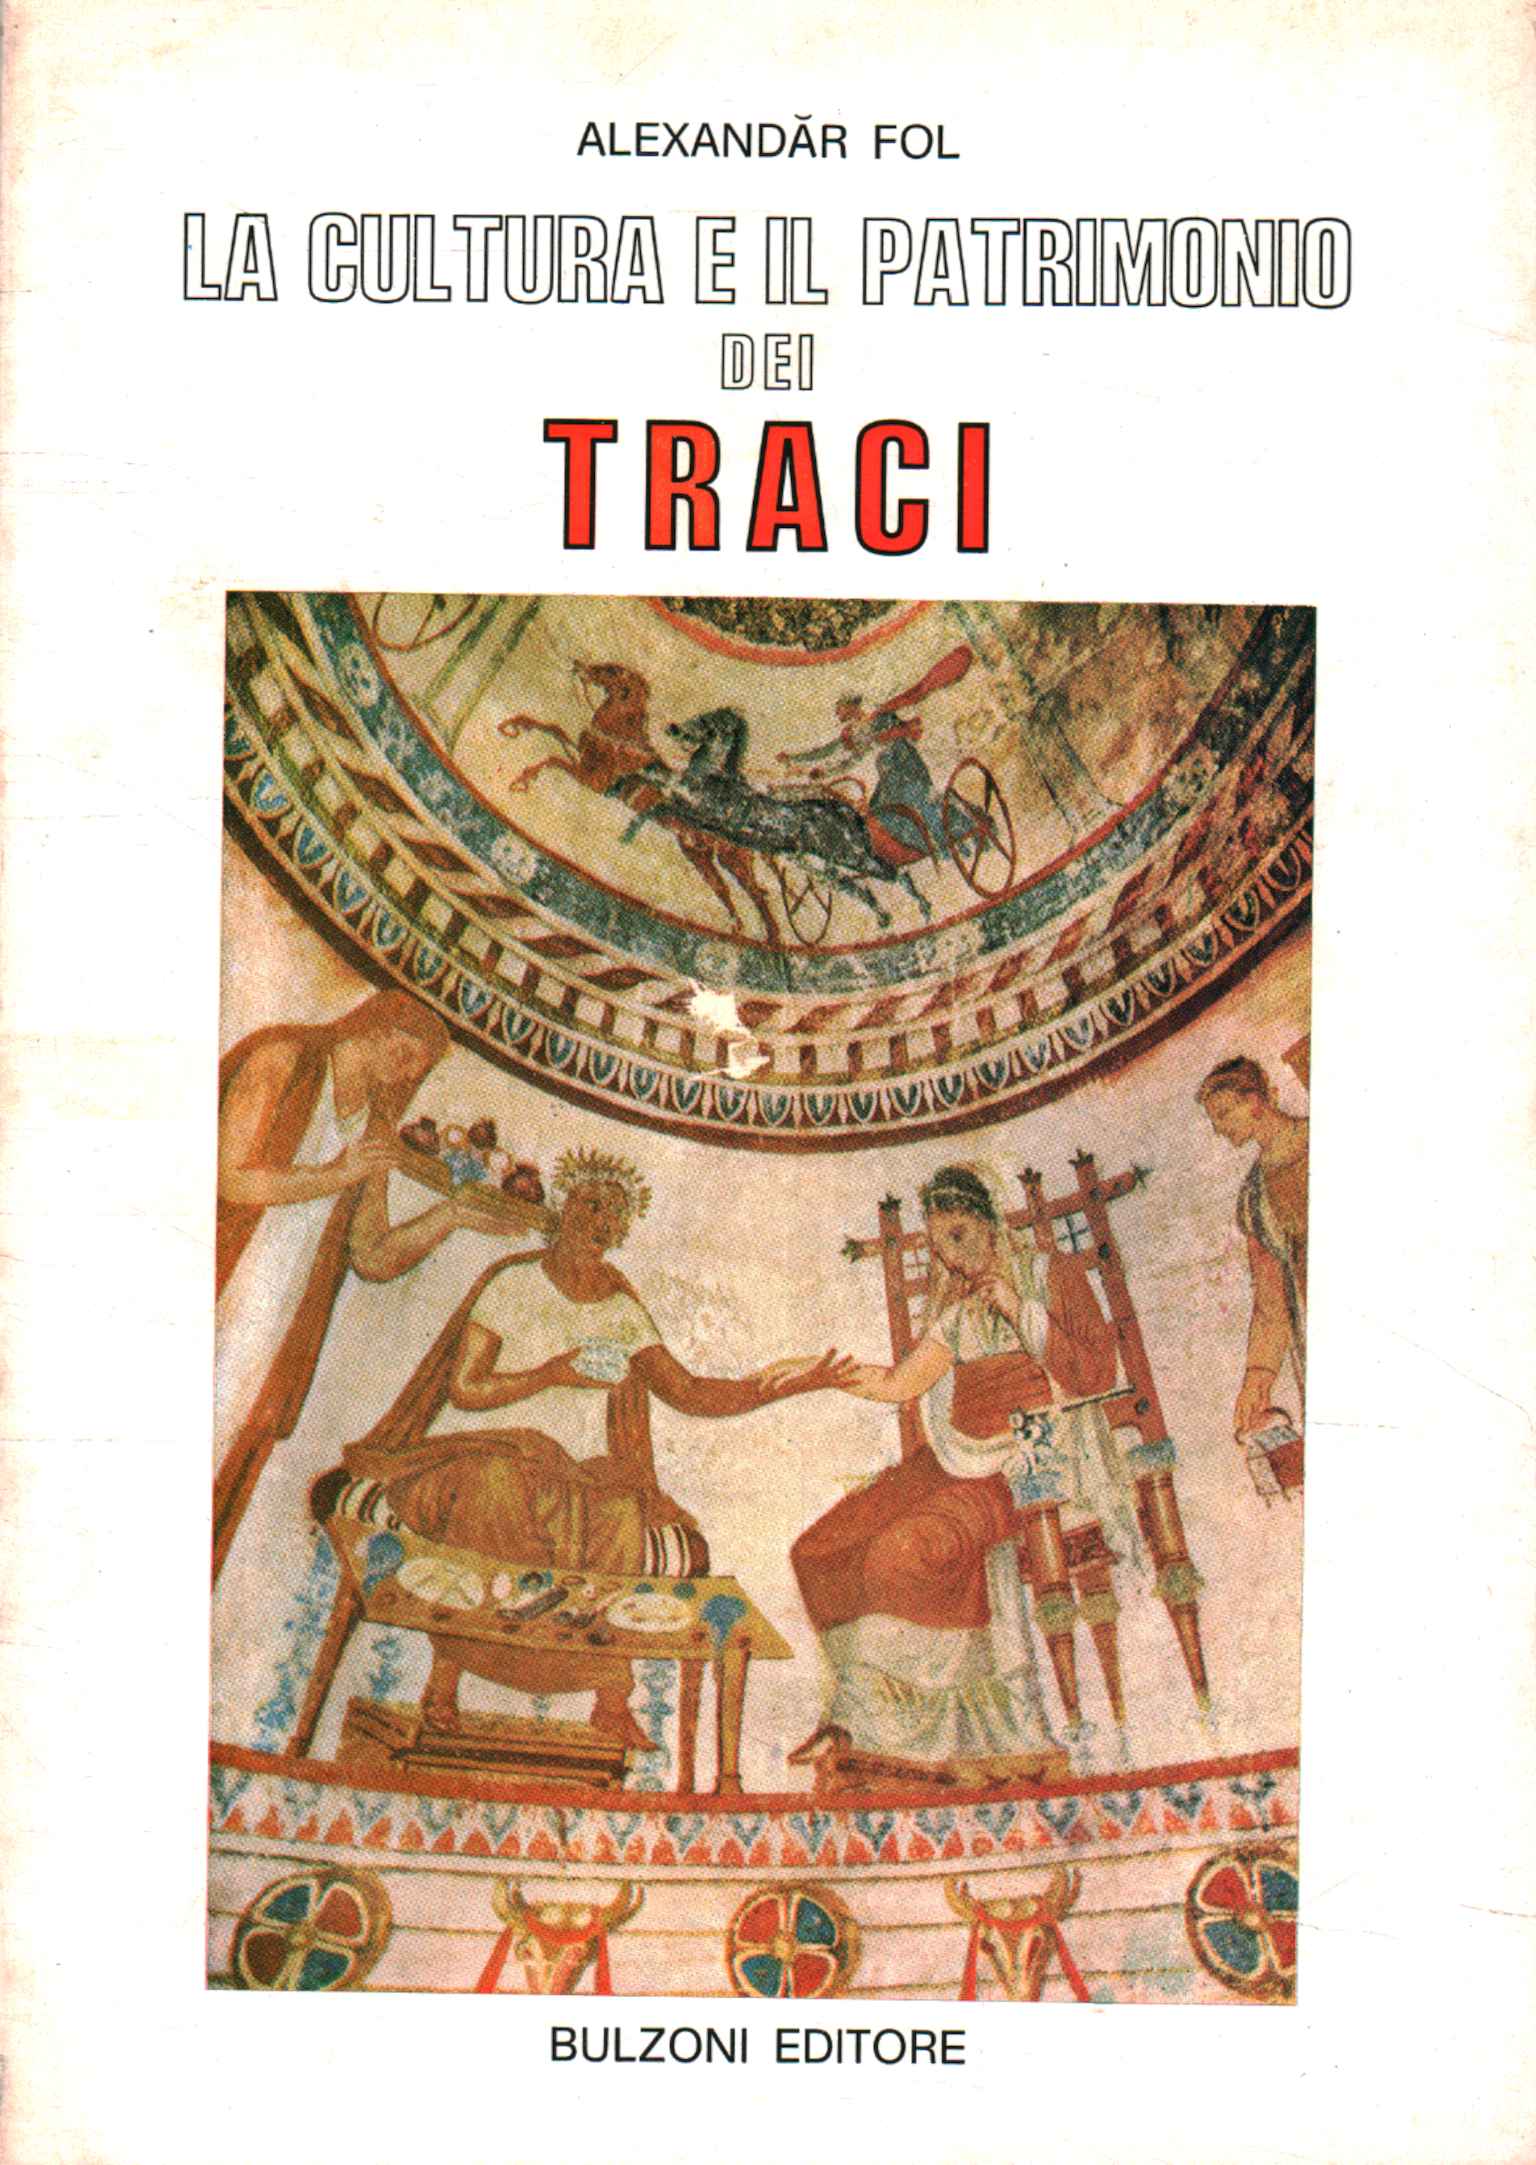 Thracian culture and heritage